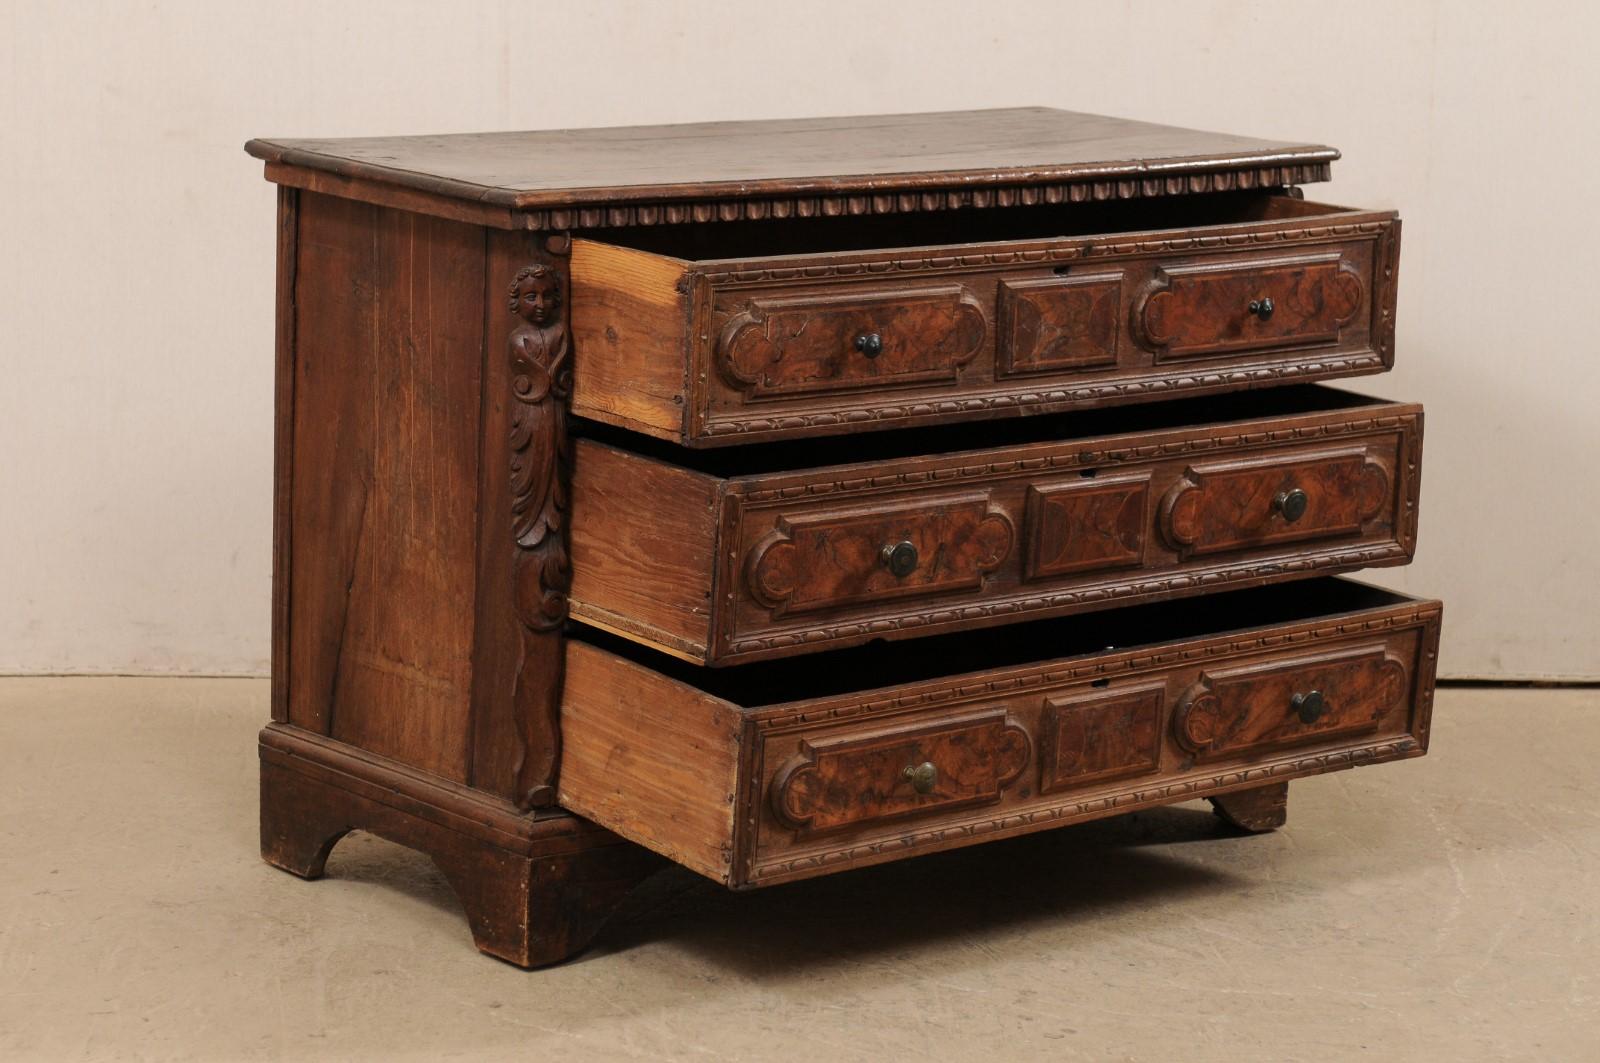 Wood 18th C Italian Chest Adorn with Putti, Egg-n-Dart, and Acanthus Carvings For Sale